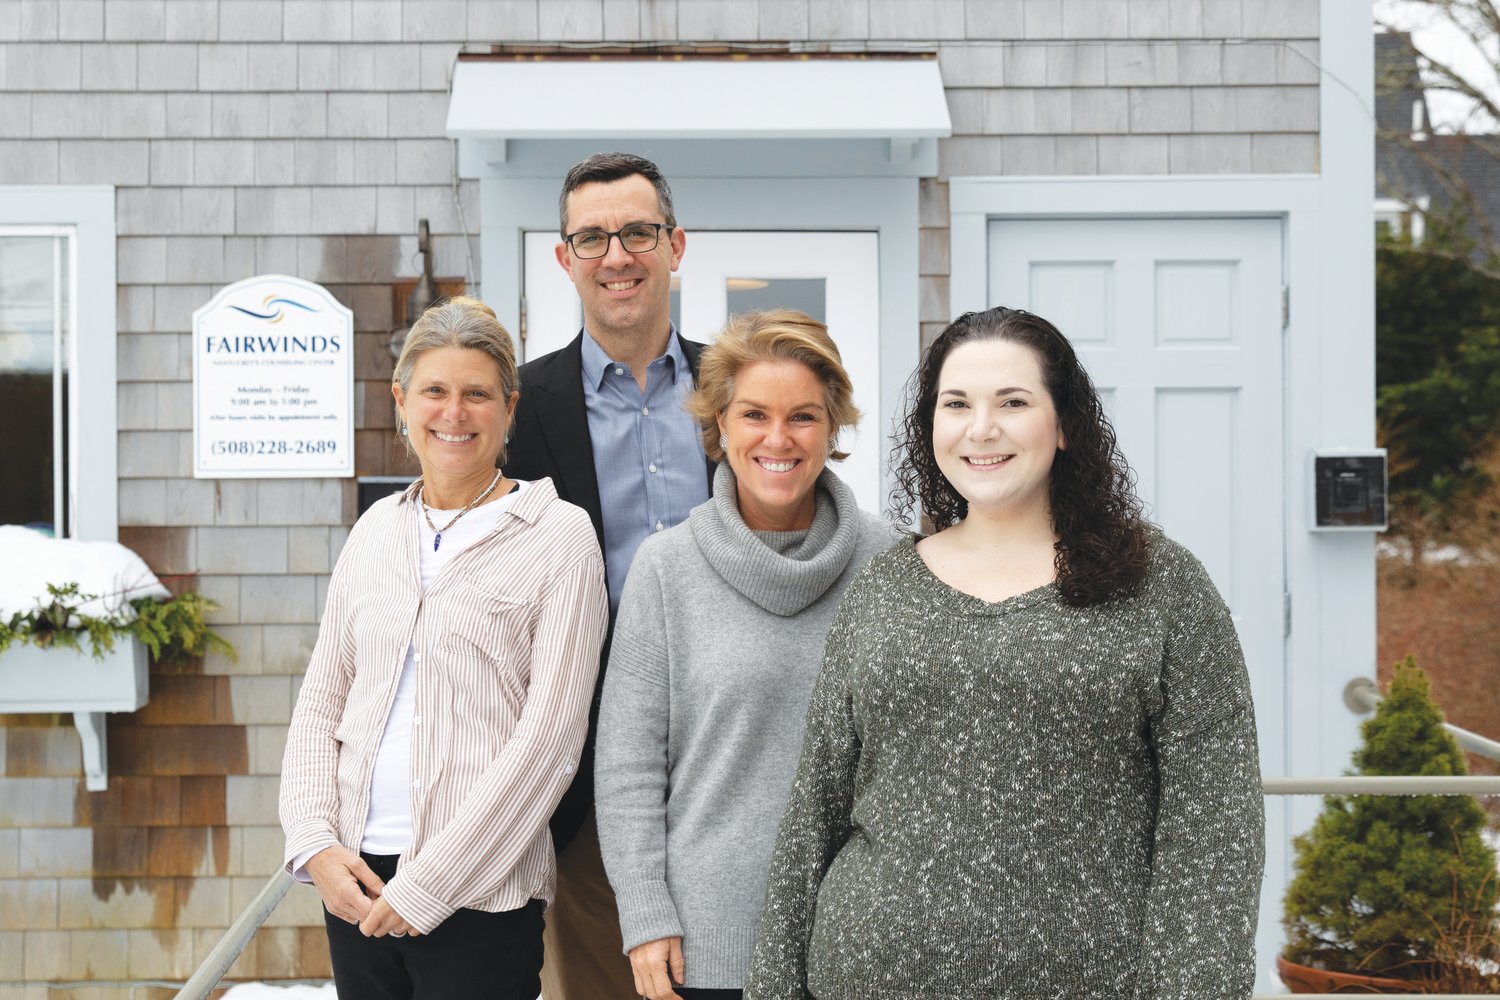 Fairwinds operations director Kristie Wilson, executive director Jason Bridges, clinical director Amanda Wright and front-office manager Celeste Ikolodo.